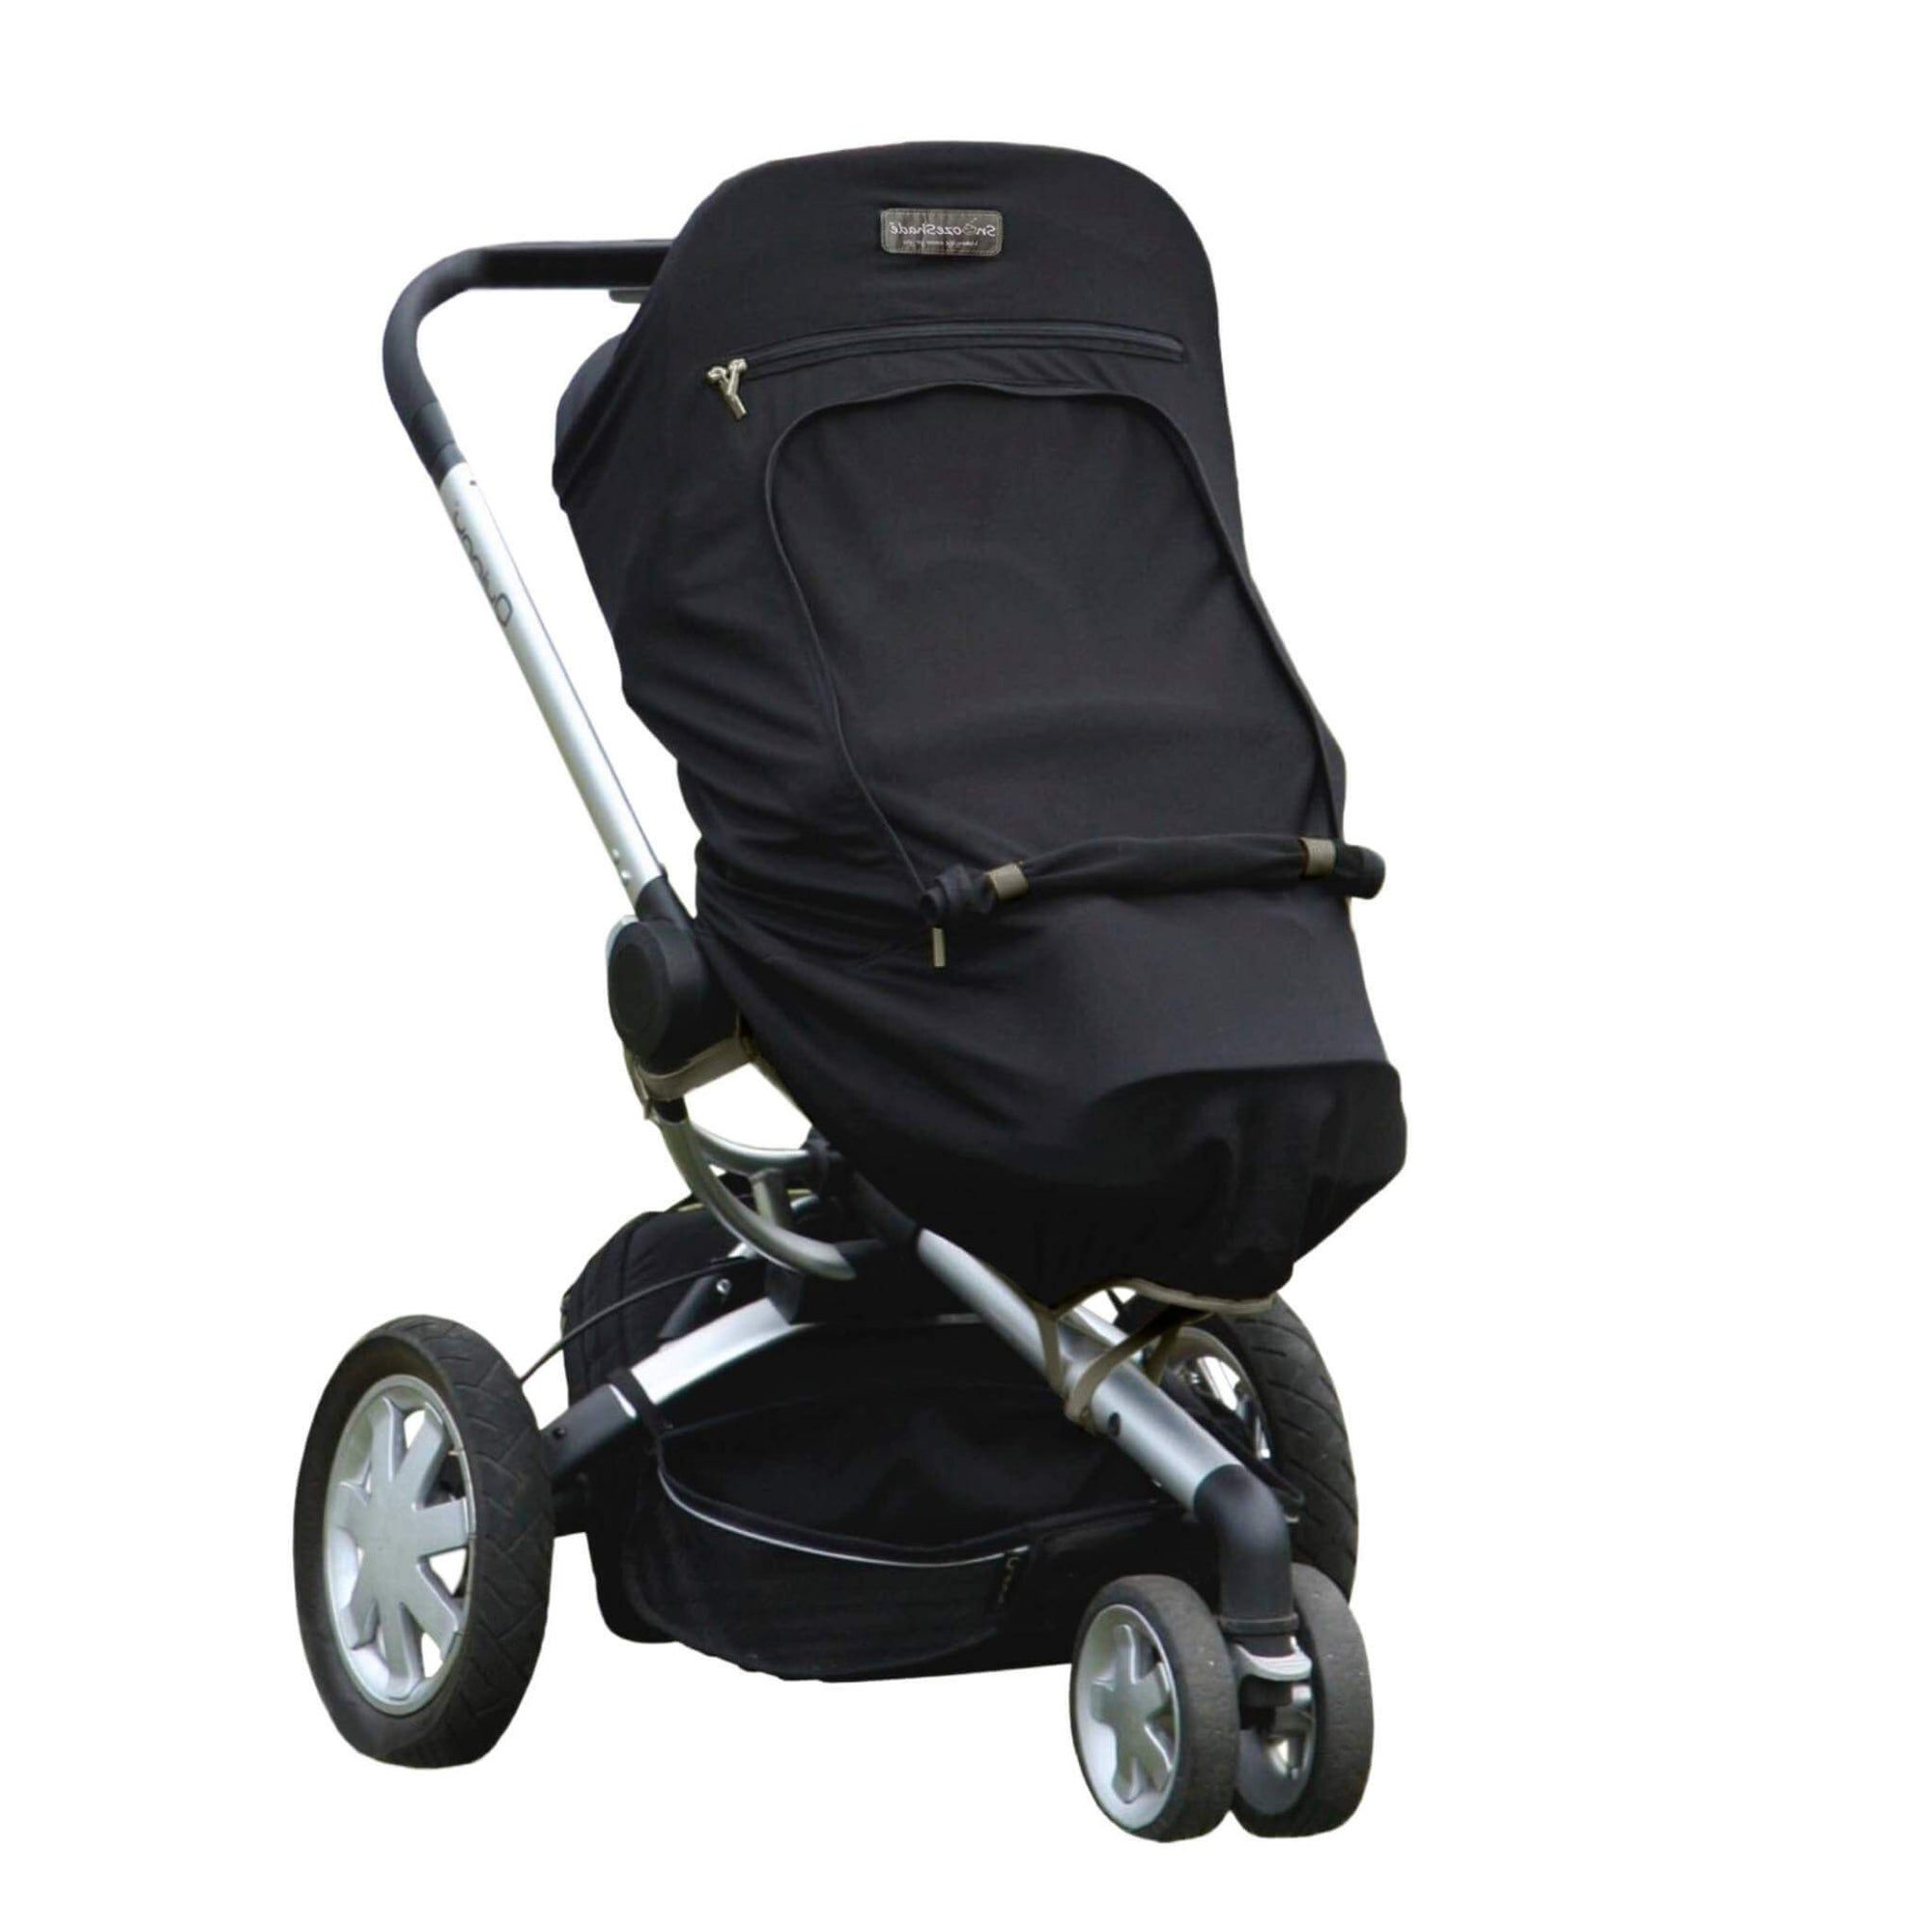 SnoozeShade Plus (6m+) | Universal-fit pushchair/buggy sun and sleep shade